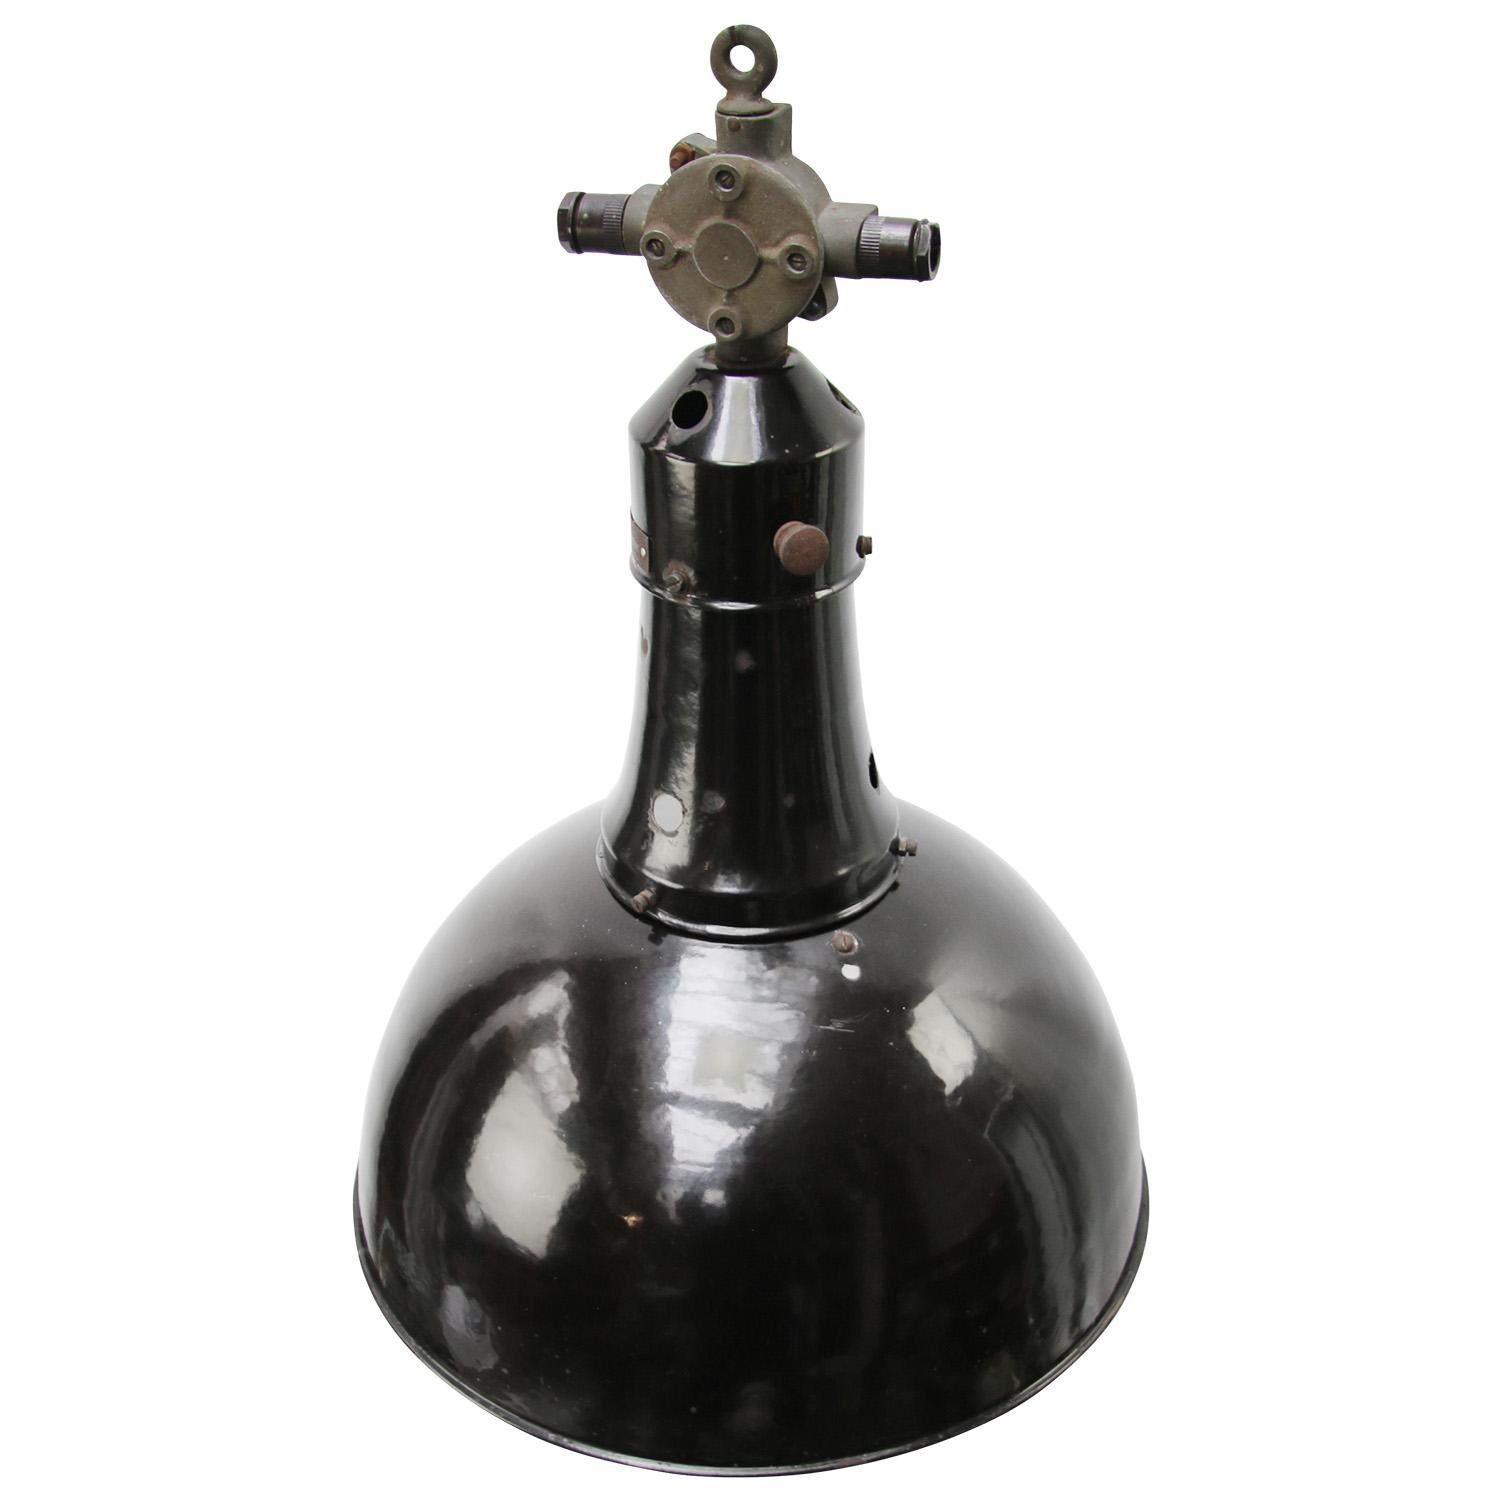 Factory light black enamel
white interior cast iron top

Weight: 3.80 kg / 8.4 lb

Priced per individual item. All lamps have been made suitable by international standards for incandescent light bulbs, energy-efficient and LED bulbs. E26/E27